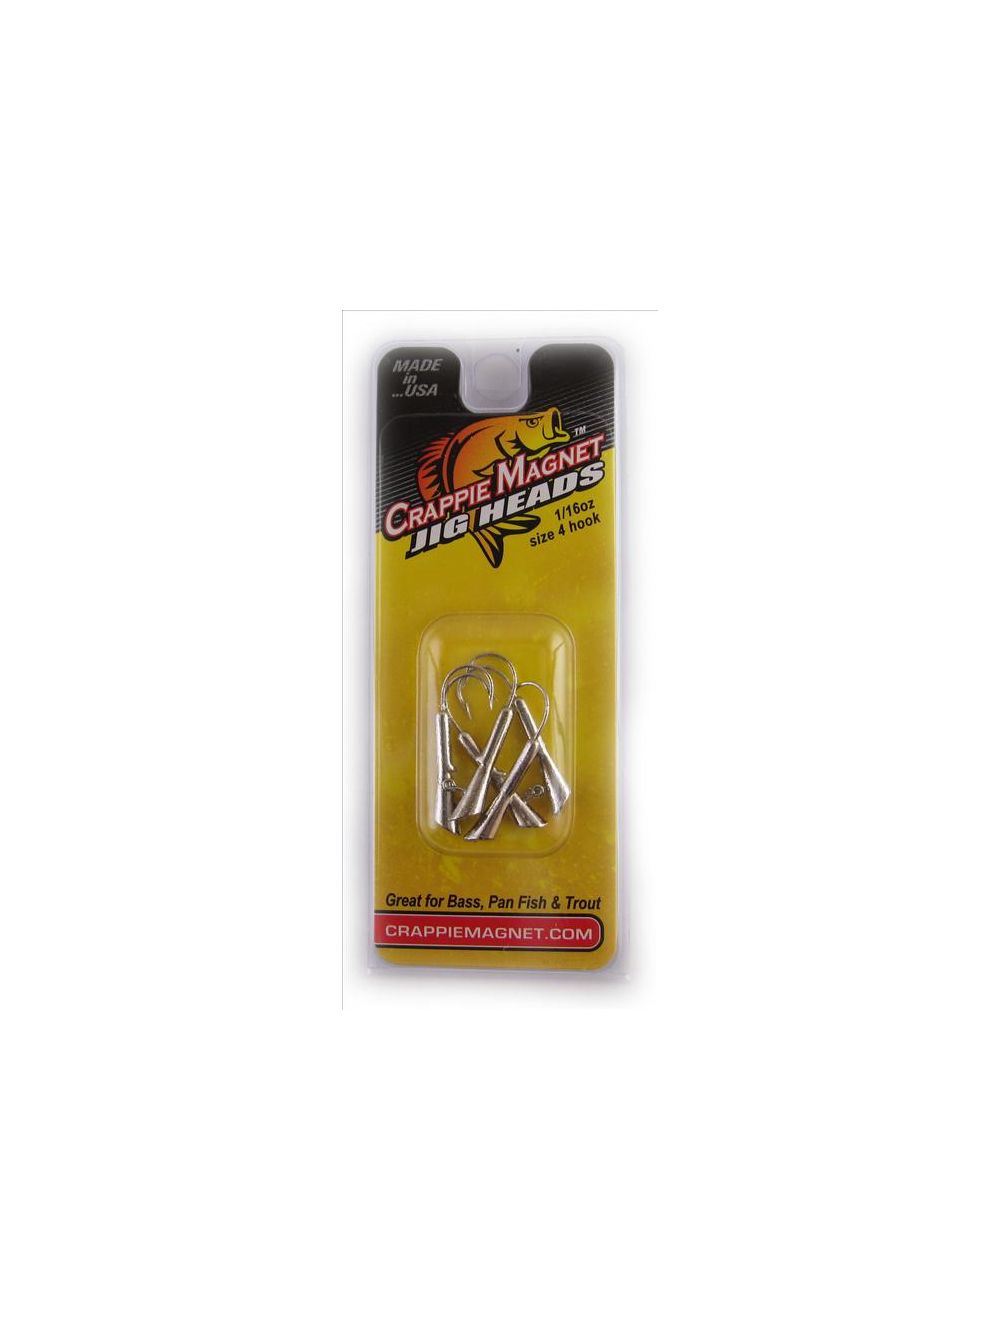 Leland Lures Crappie Magnet Jig Heads - Nickel / Weight: 1/16oz - Q'ty/Pk: 5